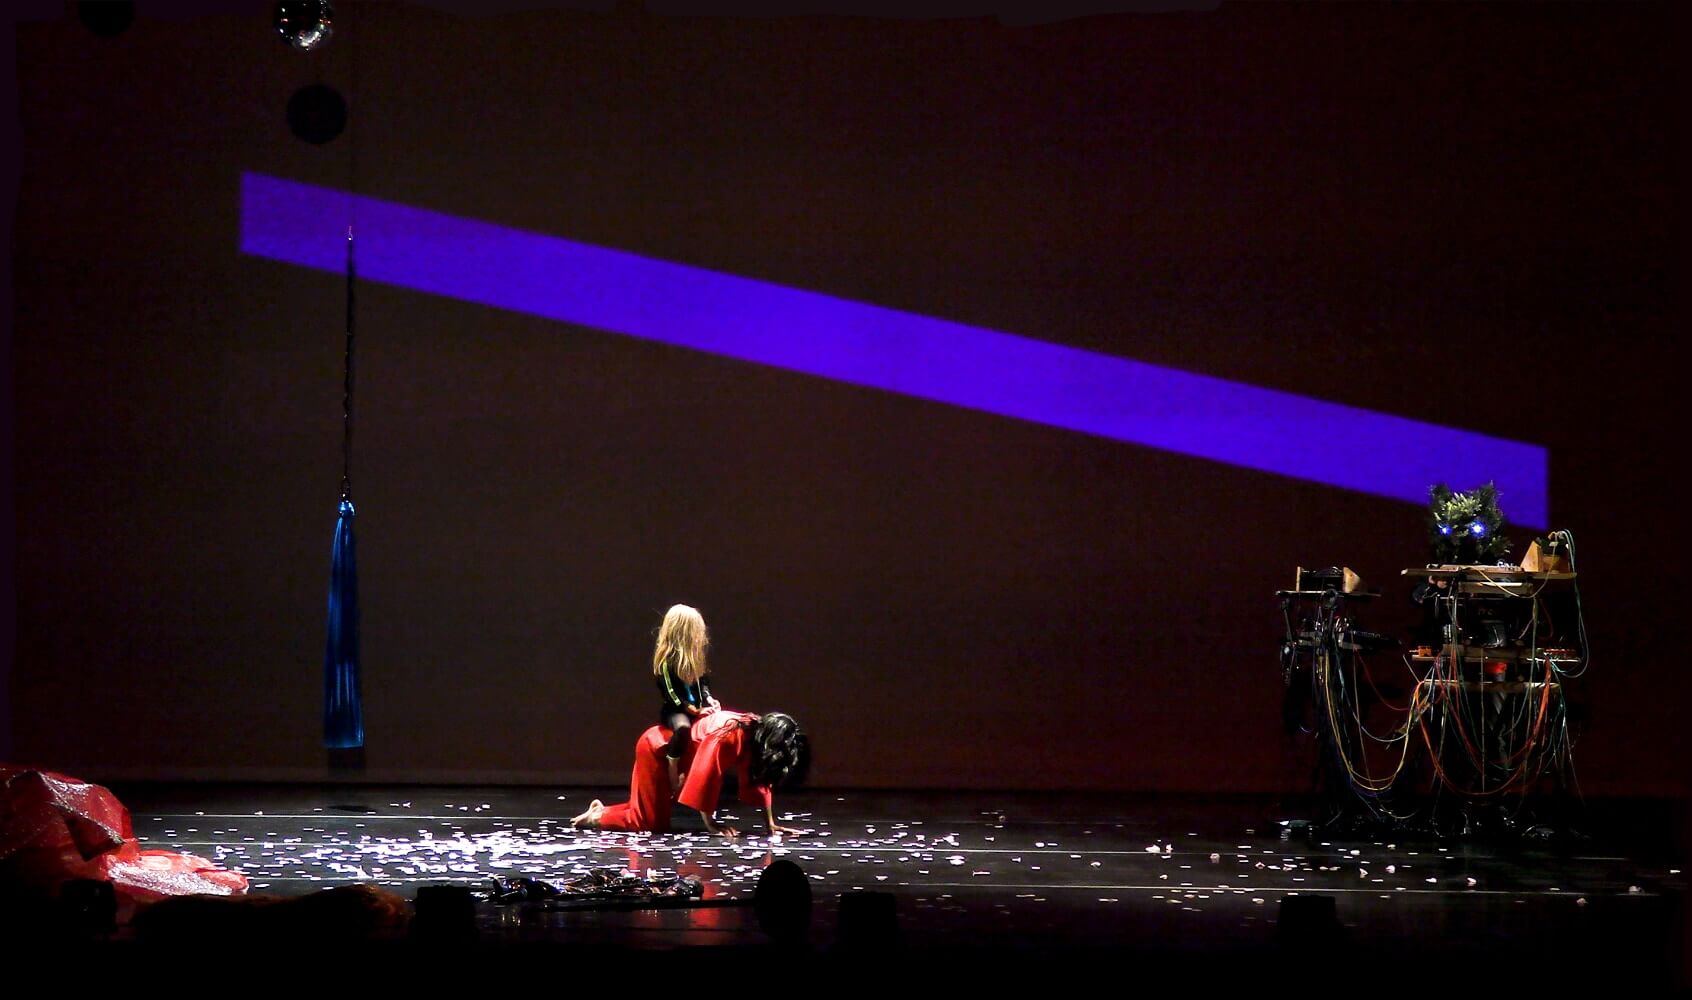 On a darkened stage covered with what appear to be ripped pieces of paper, a figure in a red pant and matching red shirt, and wearing a black helmet the obscures their face, crawls on their hands and knees. A smaller figure dressed in black with long yellow hair sits on the crawling figure, as if riding them.  A thick, bluish-purple diagonal stripe runs across the backdrop from the upper left to the bottom right. On the far right side of the stage is a DJ table with cables and equipment.